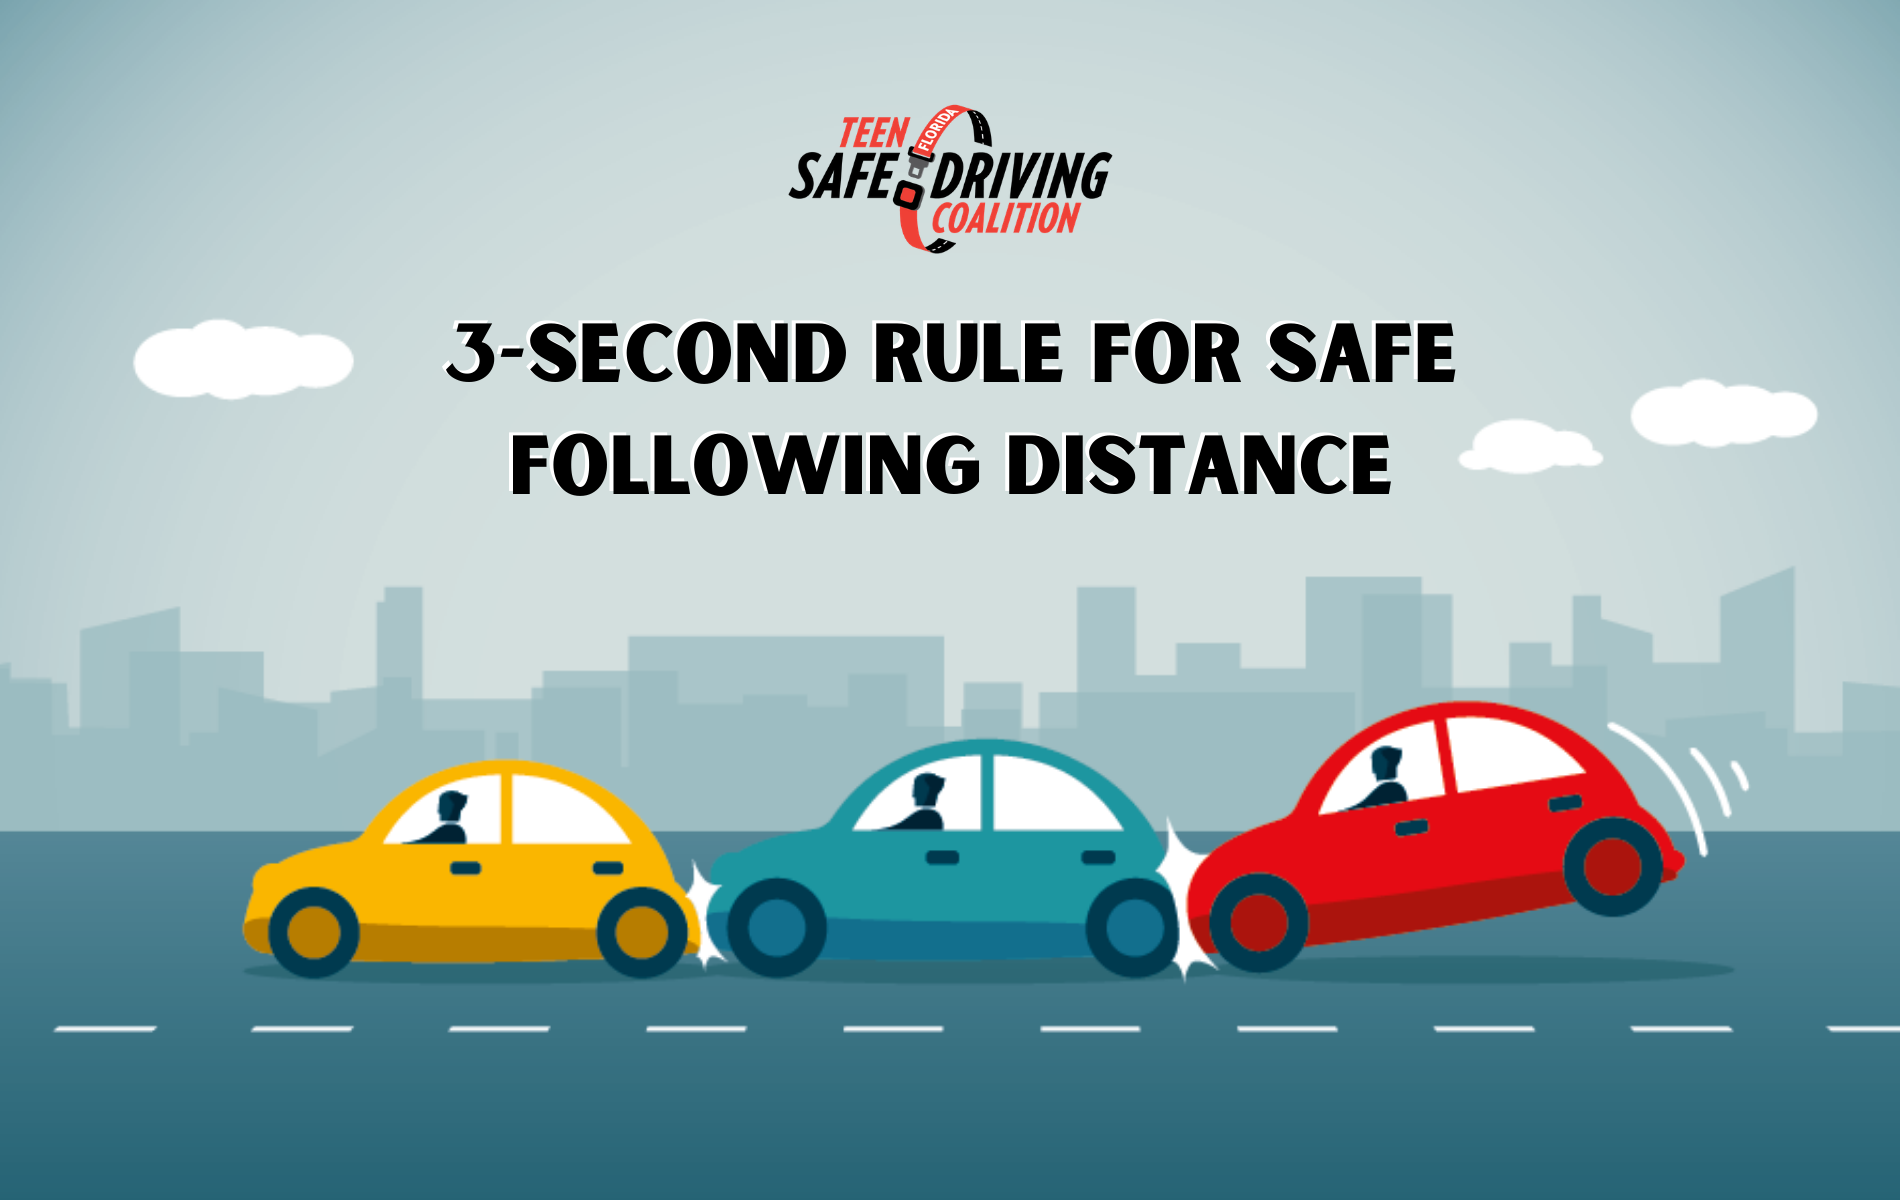 3-Second Rule for Safe Following Distance